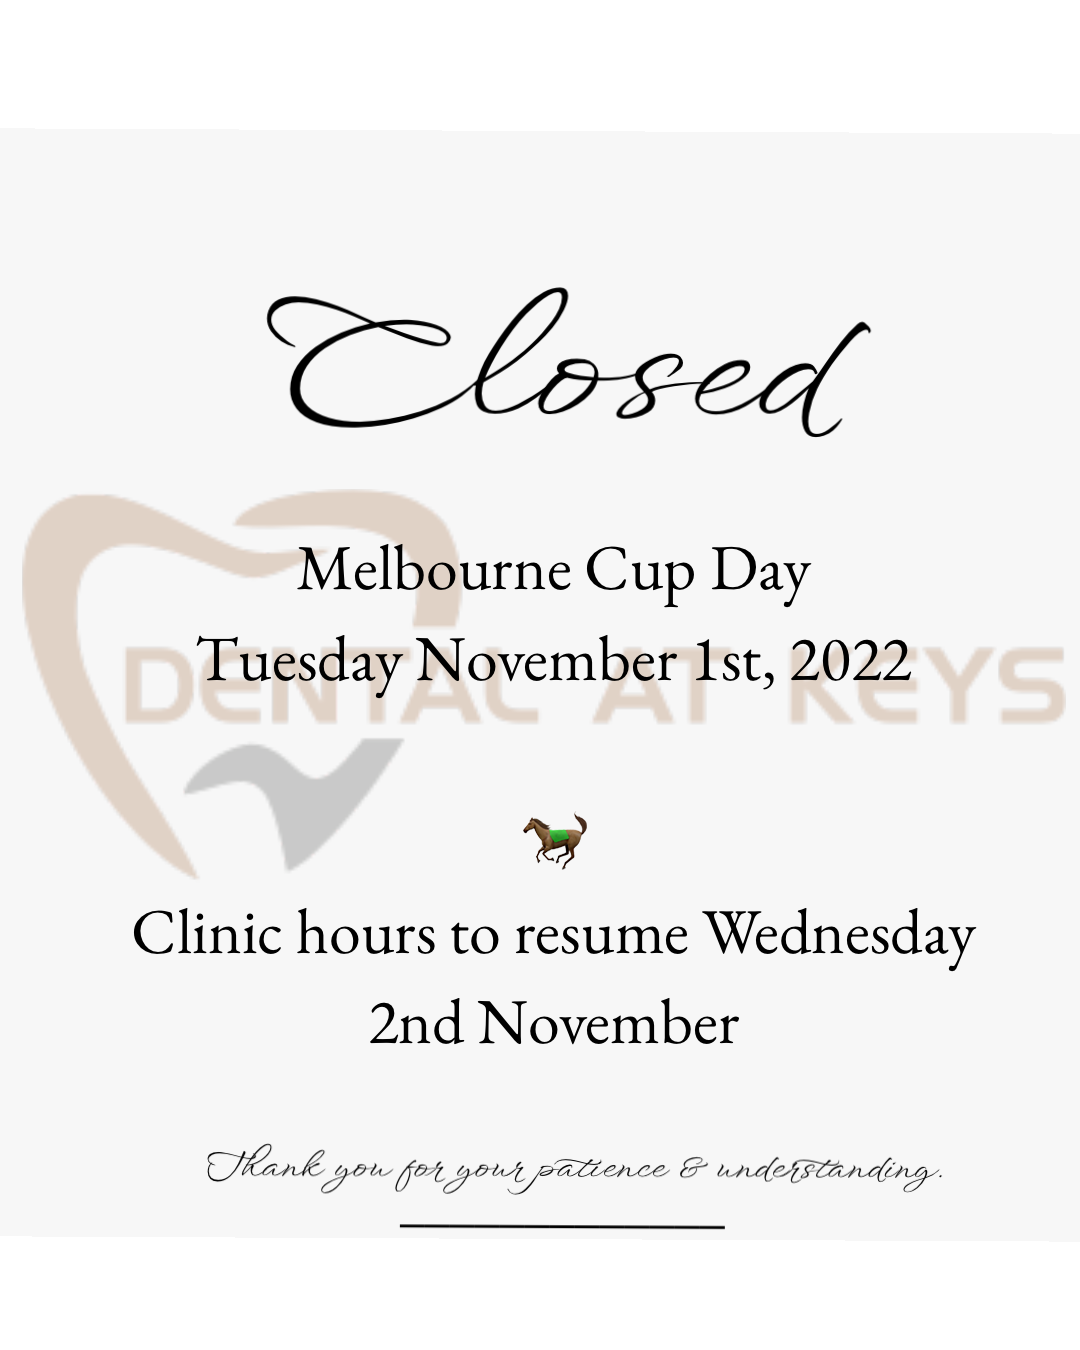 Closed – Melbourne Cup Day